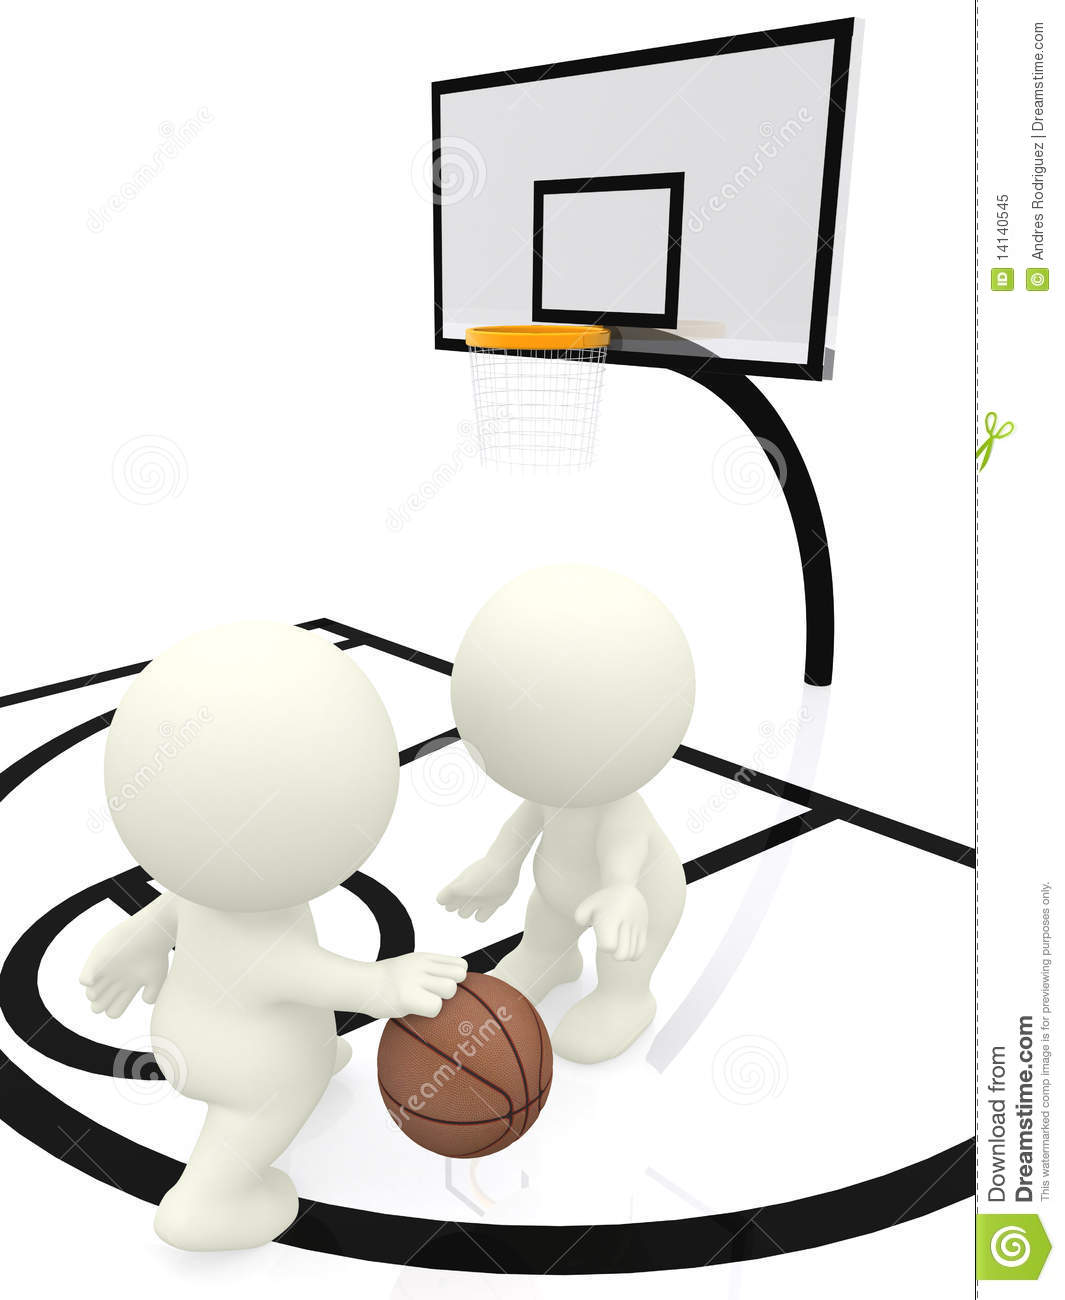 3d People Bouncing Basketball Royalty Free Stock Photo   Image